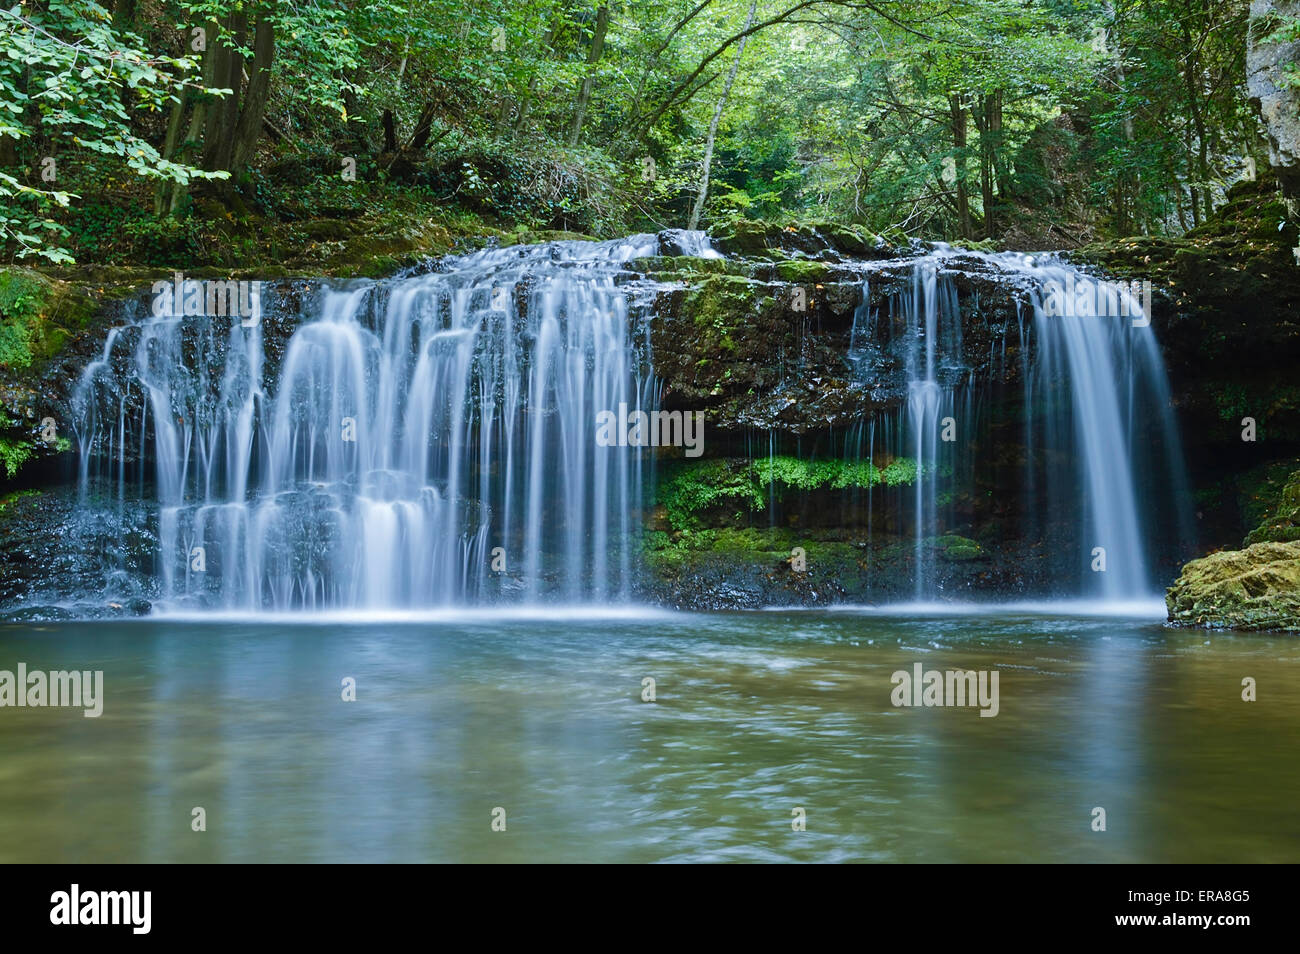 a waterfall in the forest, long time exposure Stock Photo